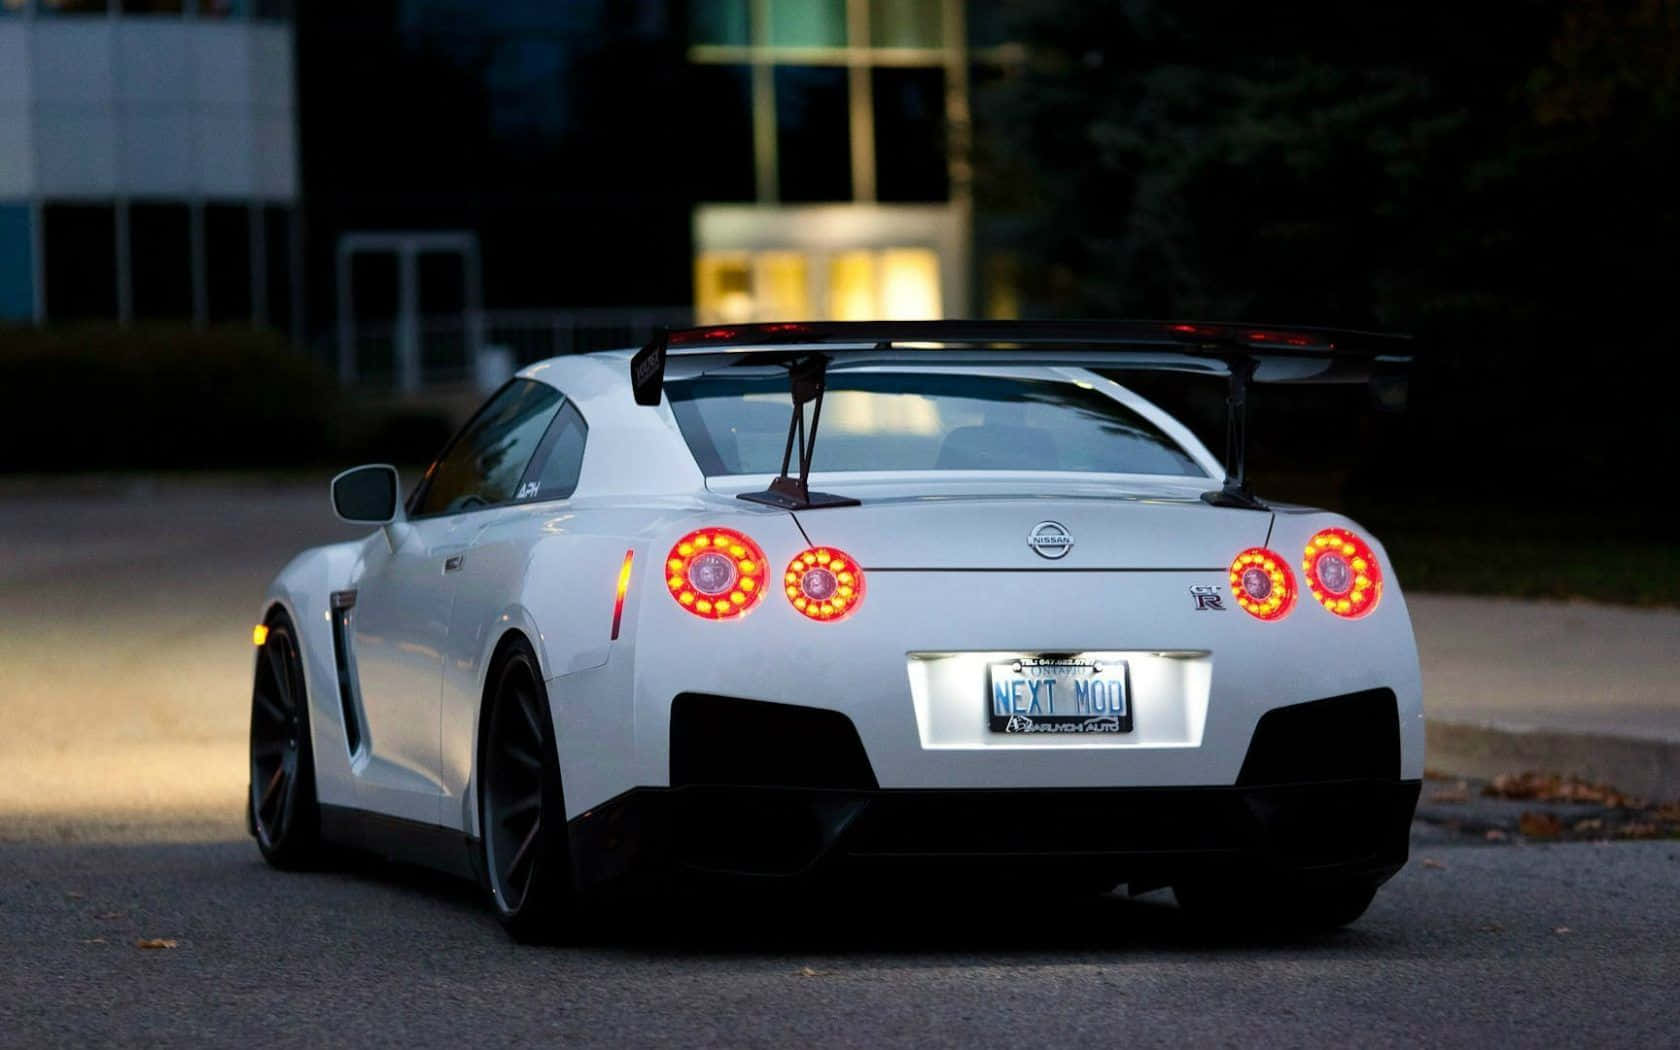 Envious Of The Cool Gtr On The Road